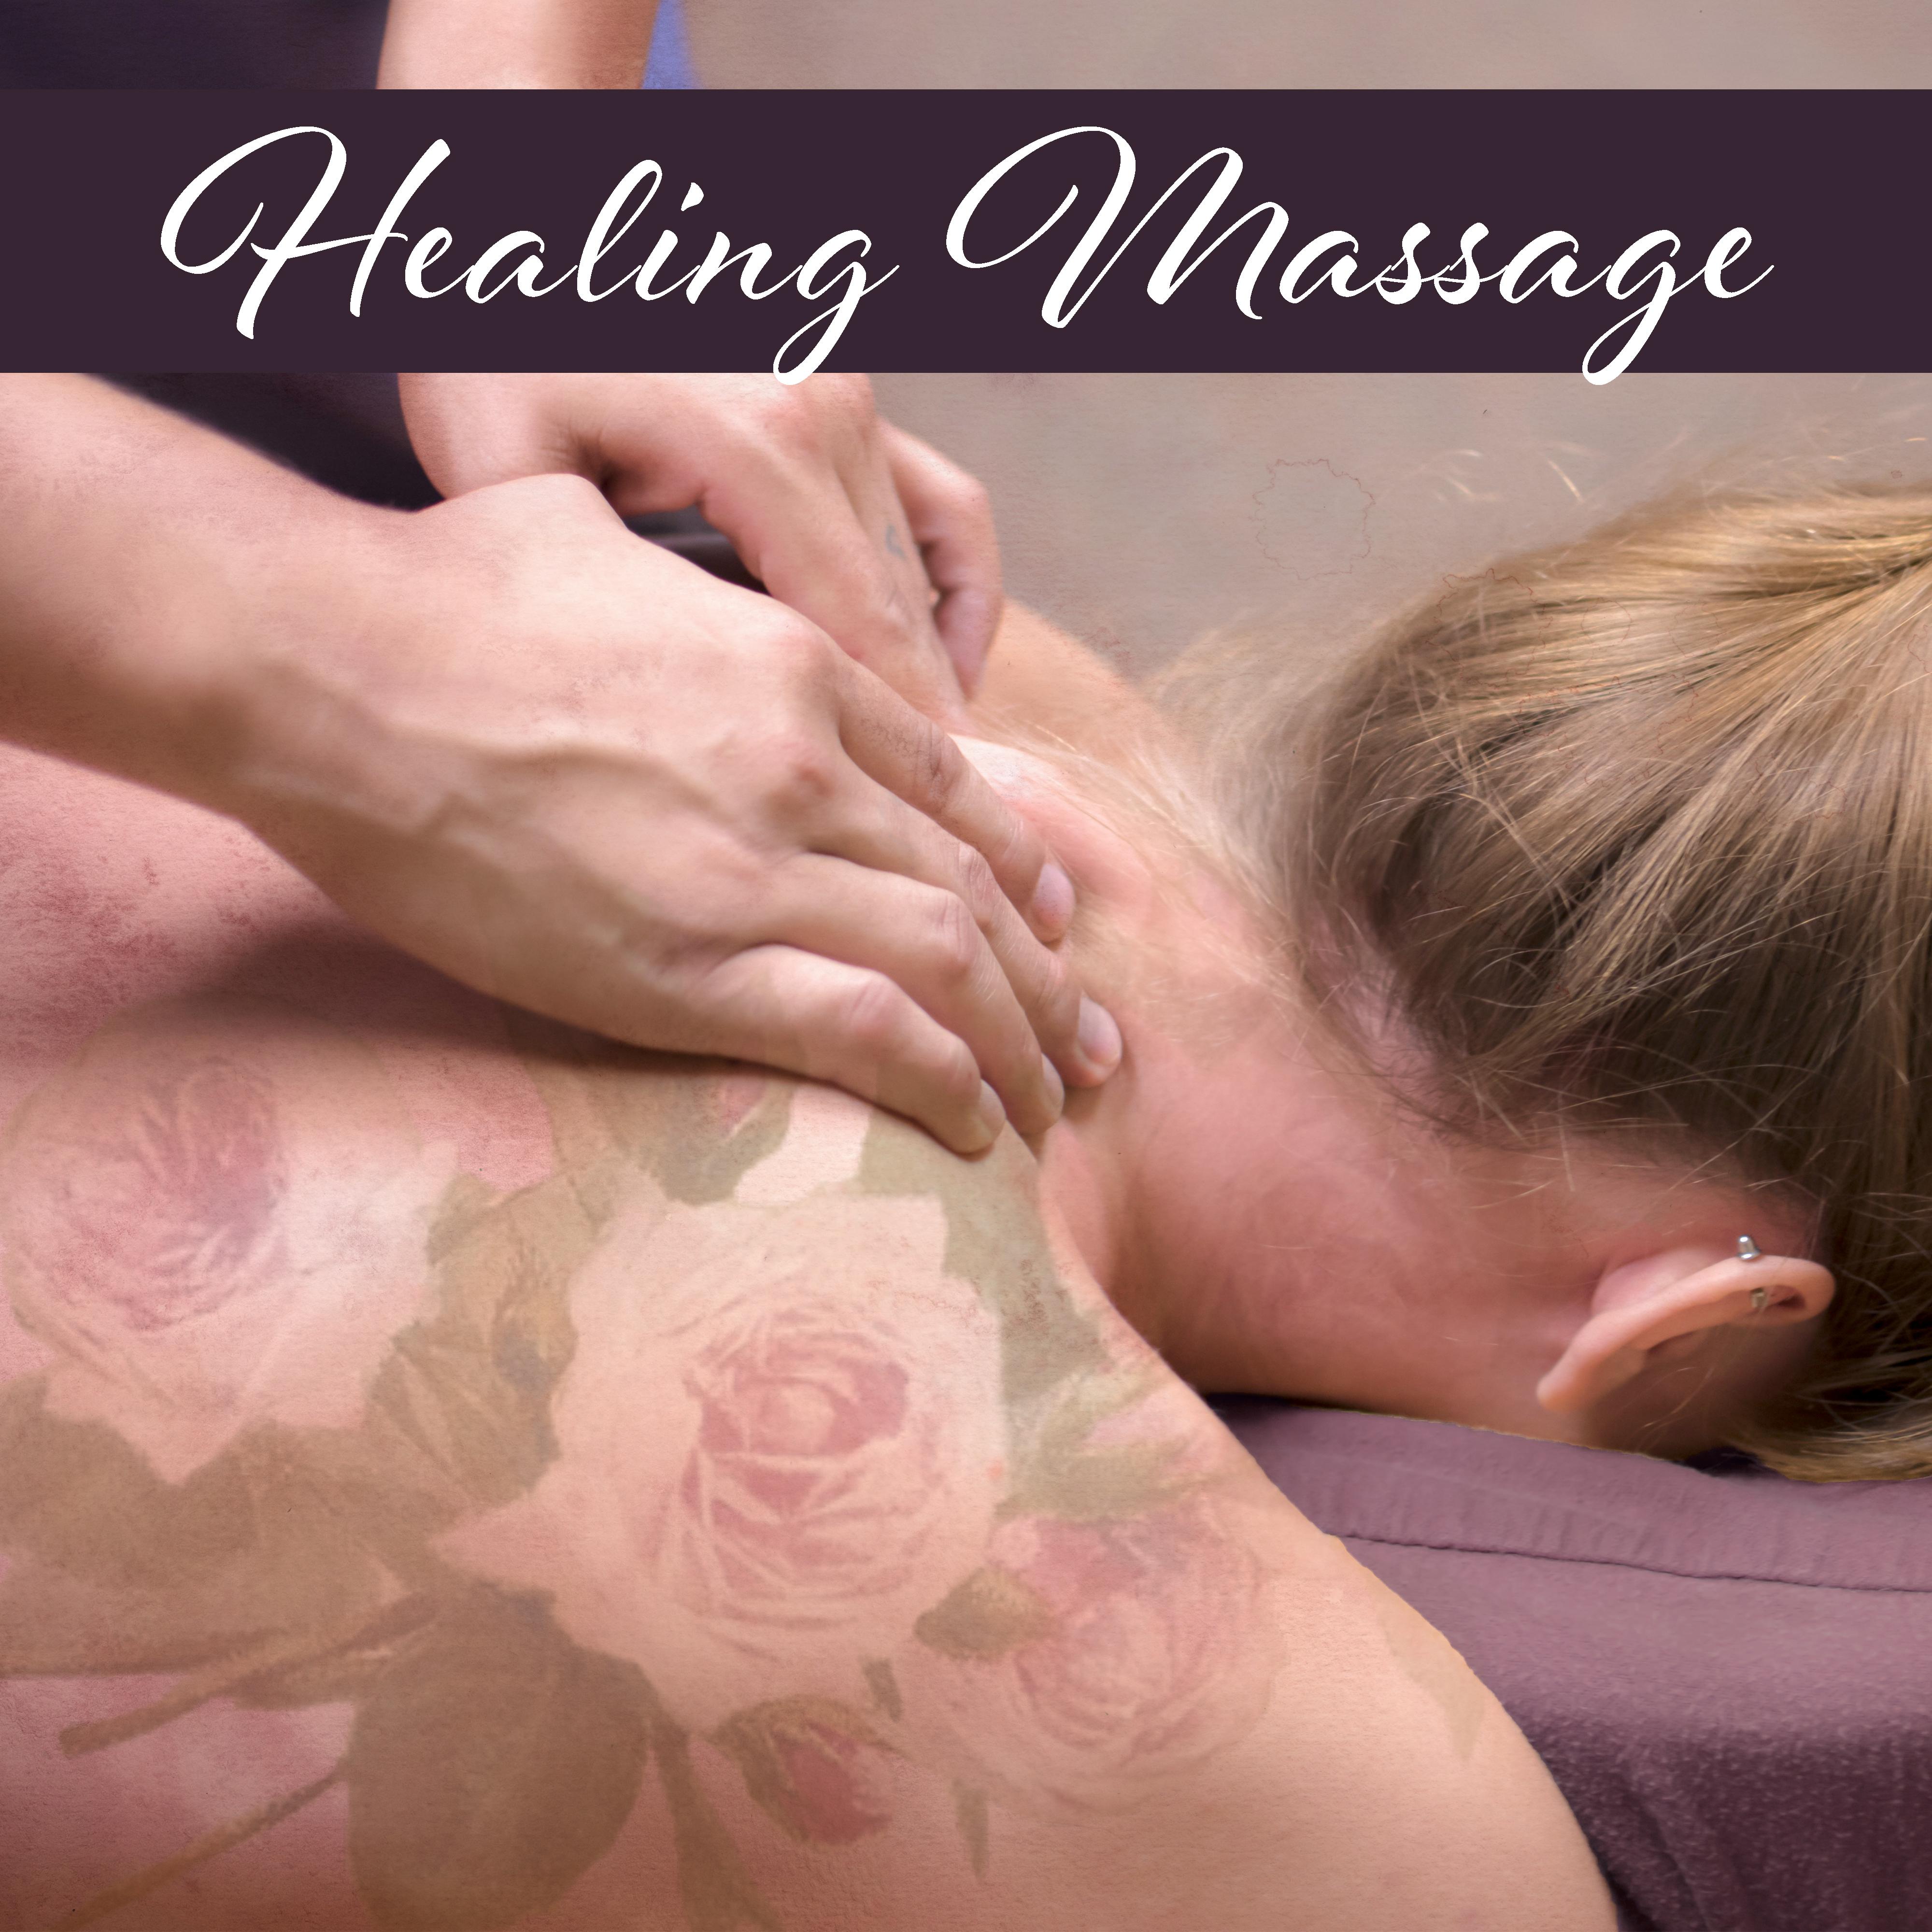 Healing Massage – Therapy Sounds, Relaxing Music for Spa, Wellness, Relaxation, Stress Relief, Reiki, Tranquility